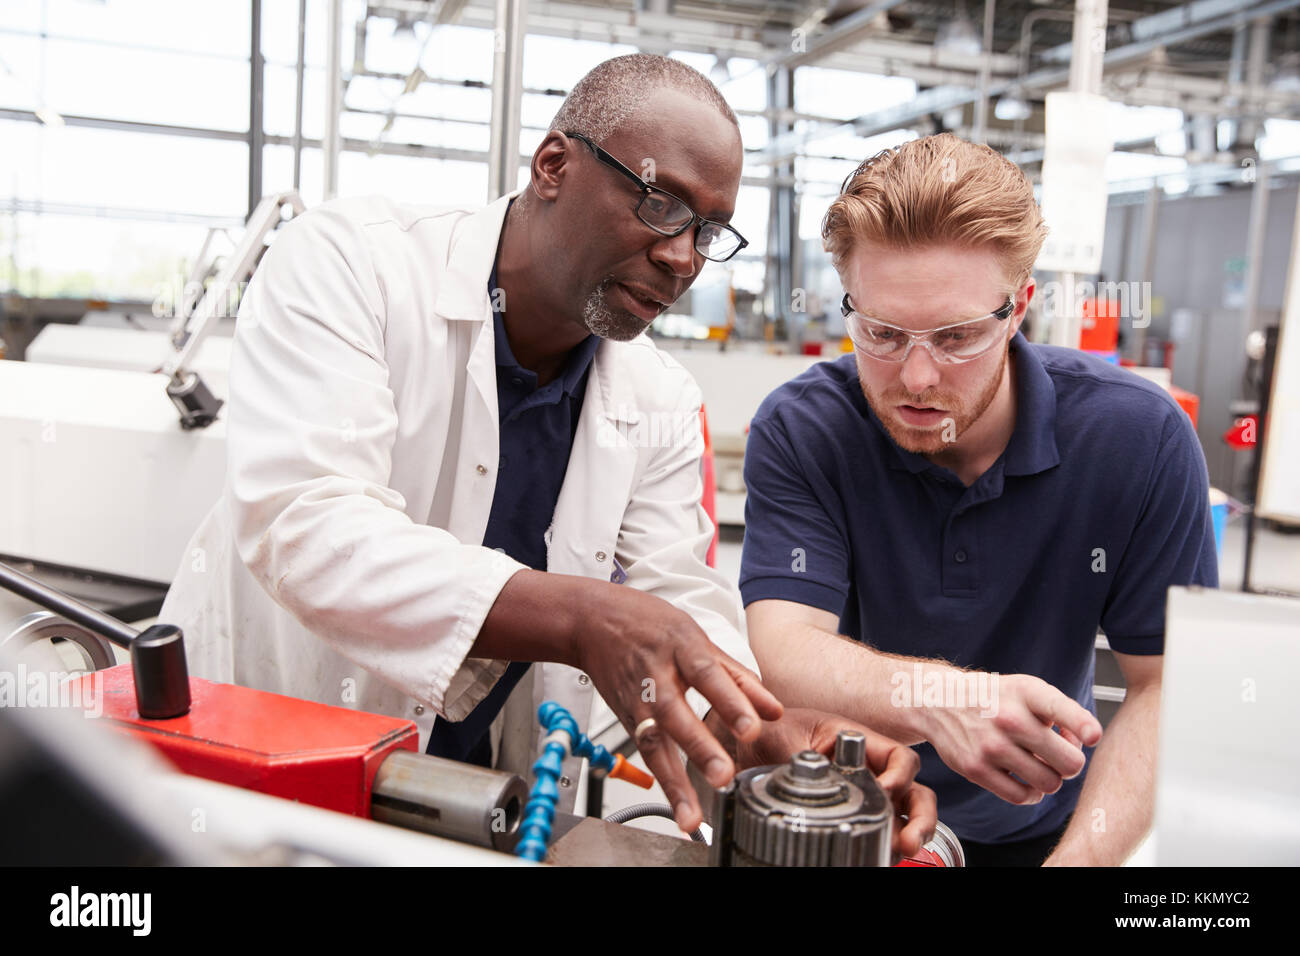 Engineer advising a male apprentice in a factory, close up Stock Photo